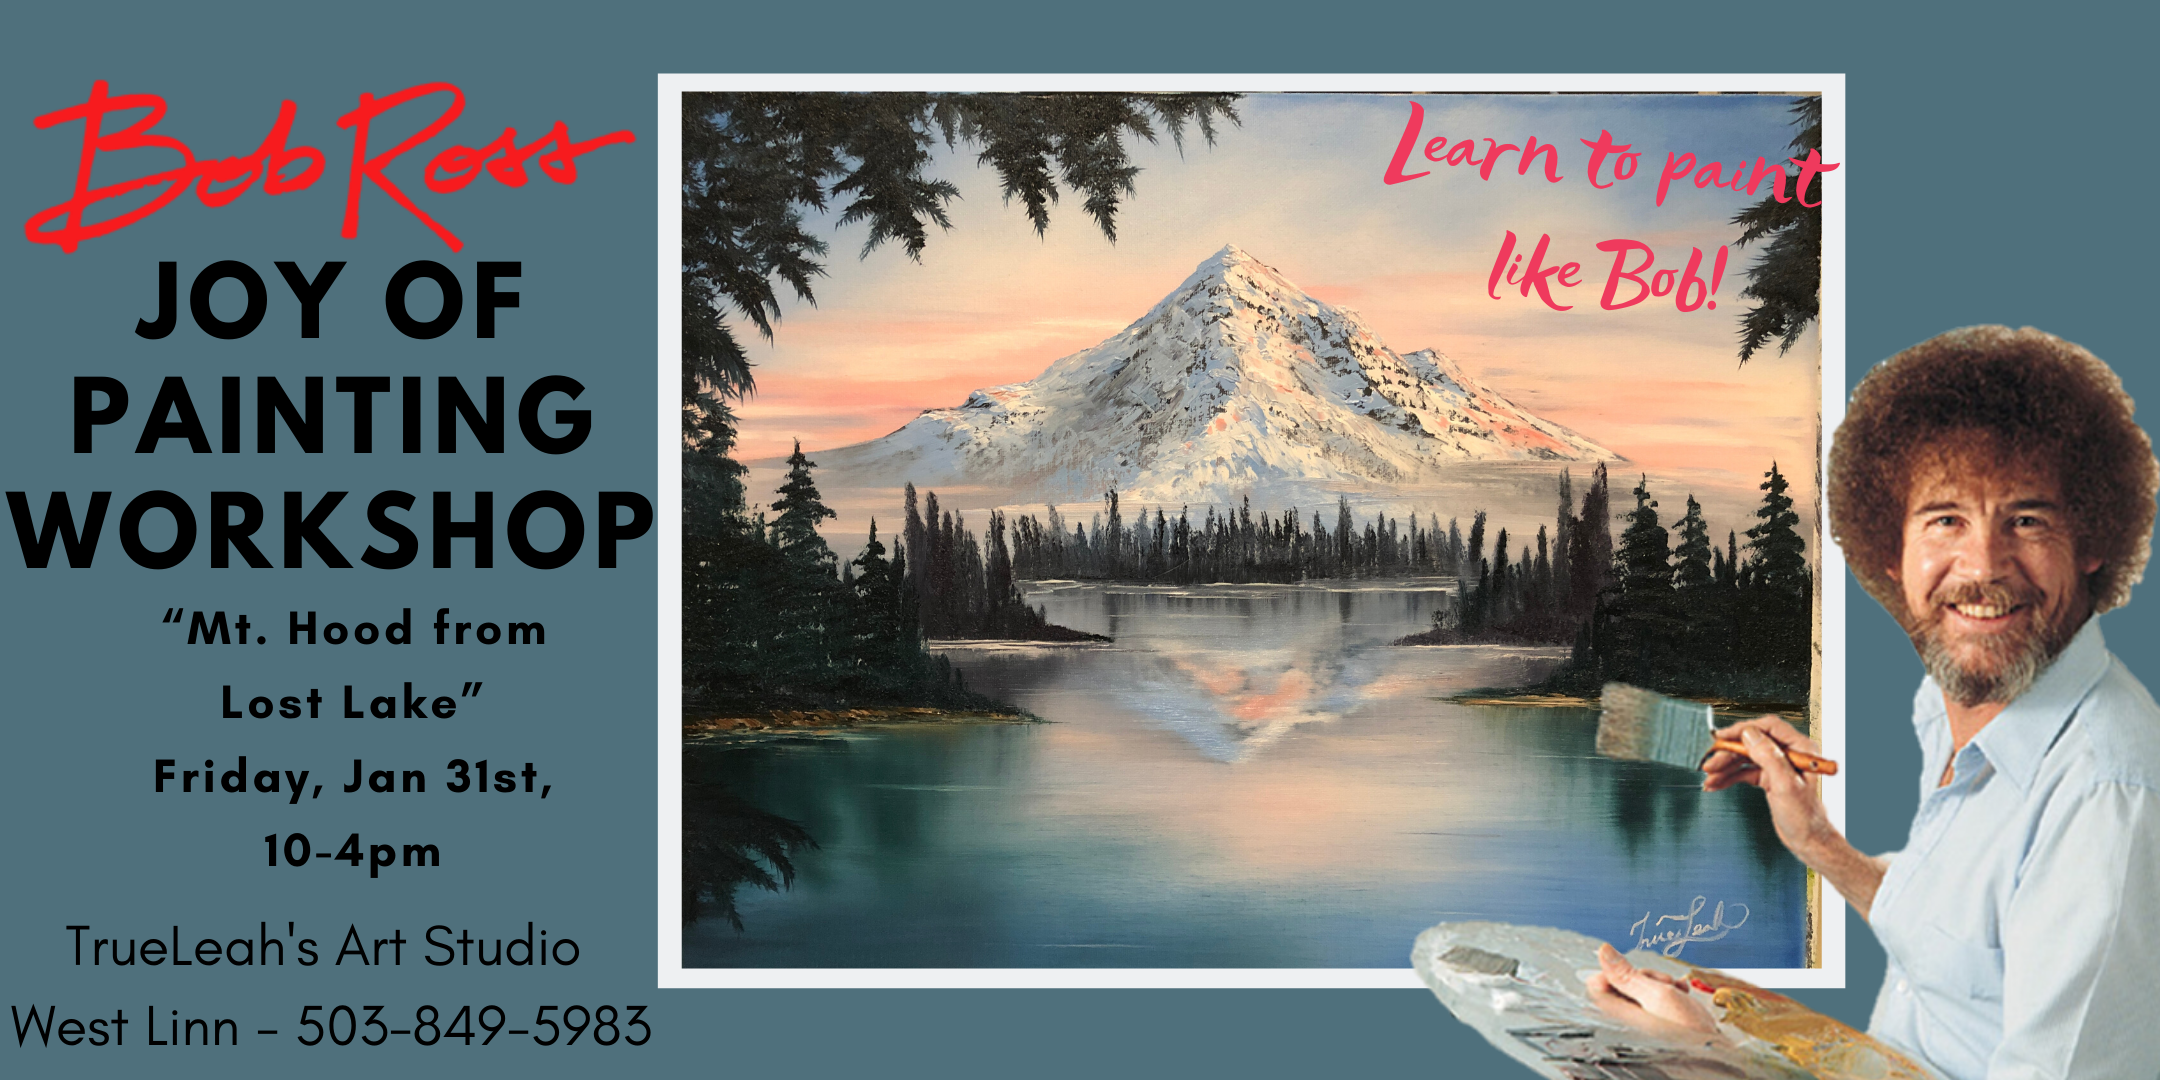 Bob Ross Joy of Painting Workshop - Mt Hood from Lost Lake